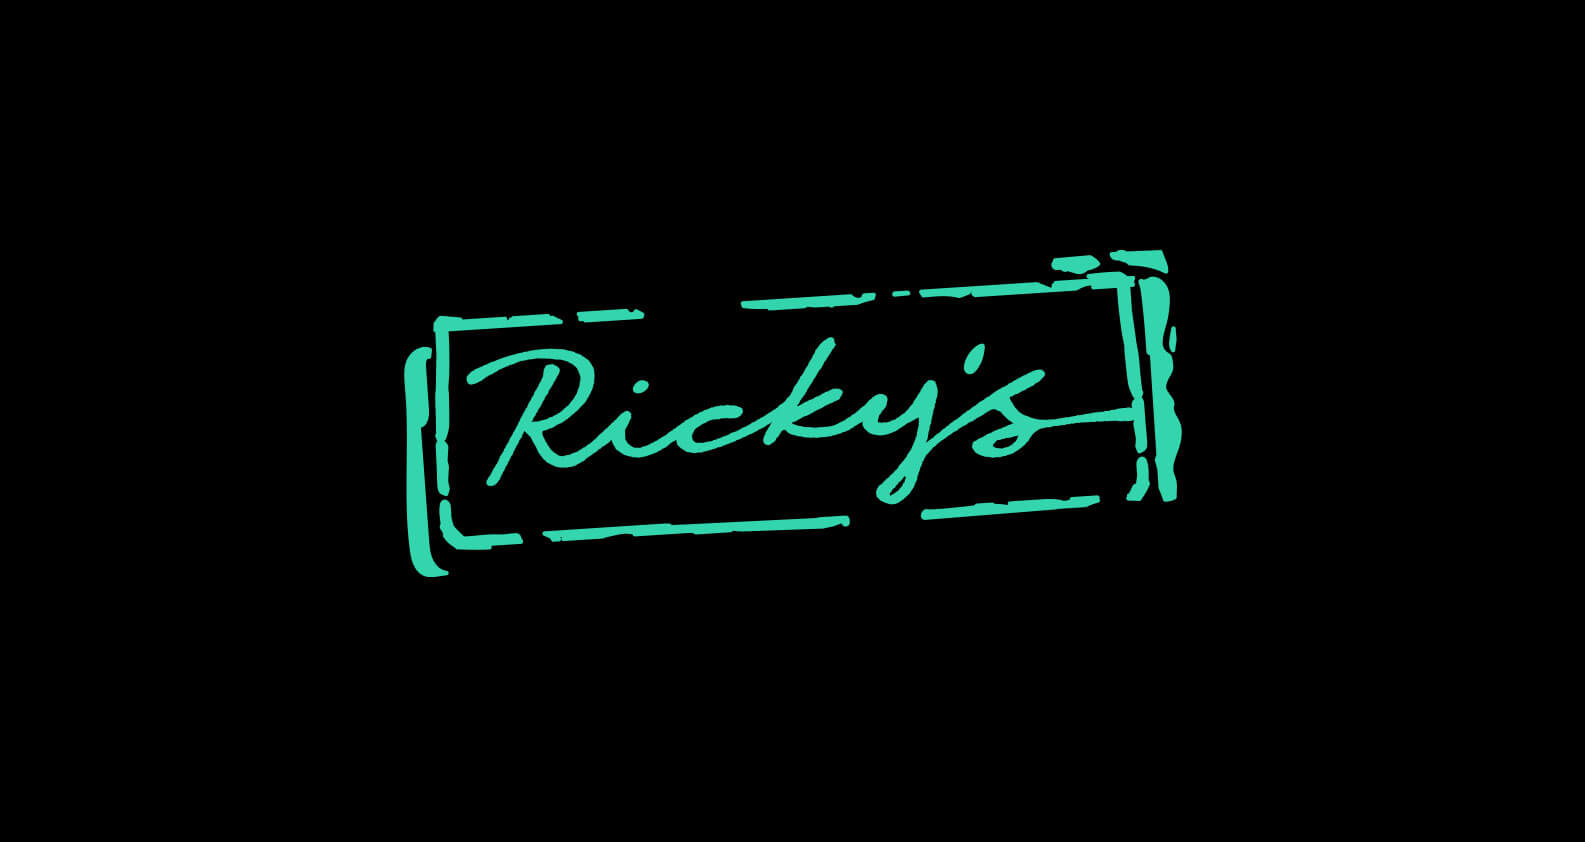 Ricky's logo and branding by Jacober Creative